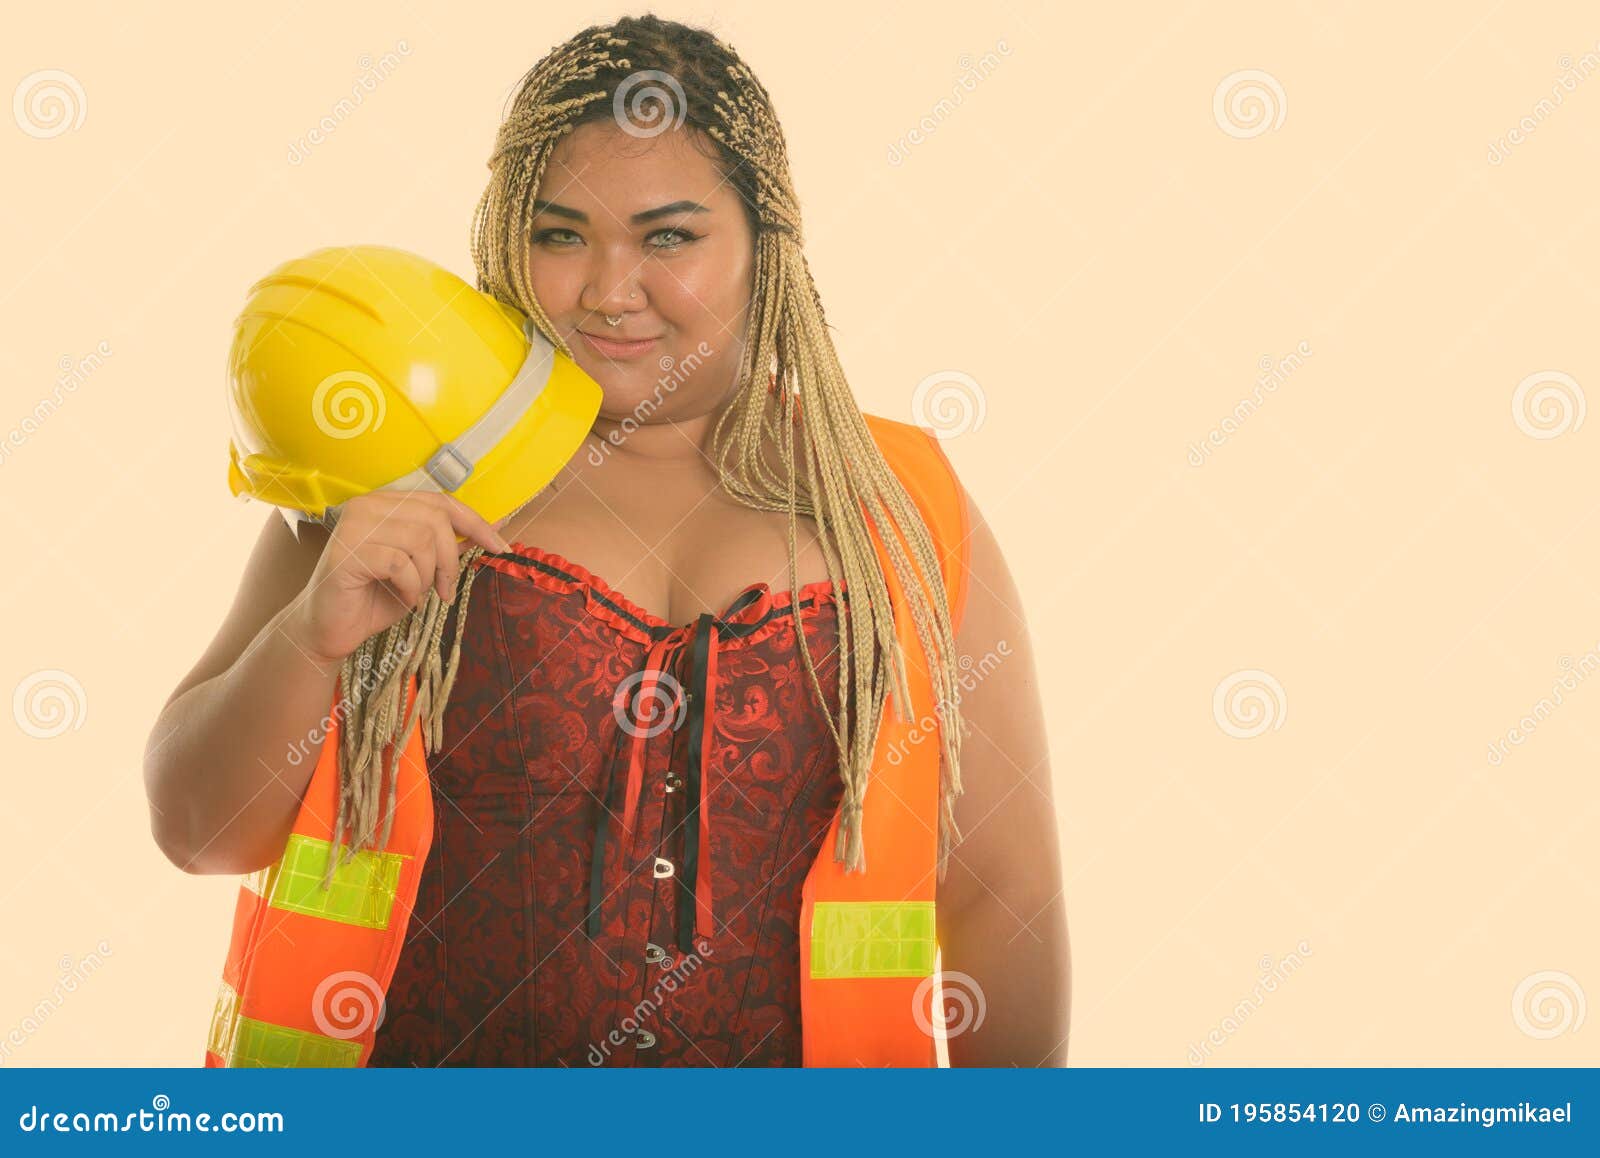 Young Fat Asian Construction Woman Holding Safety Helmet Near The Face